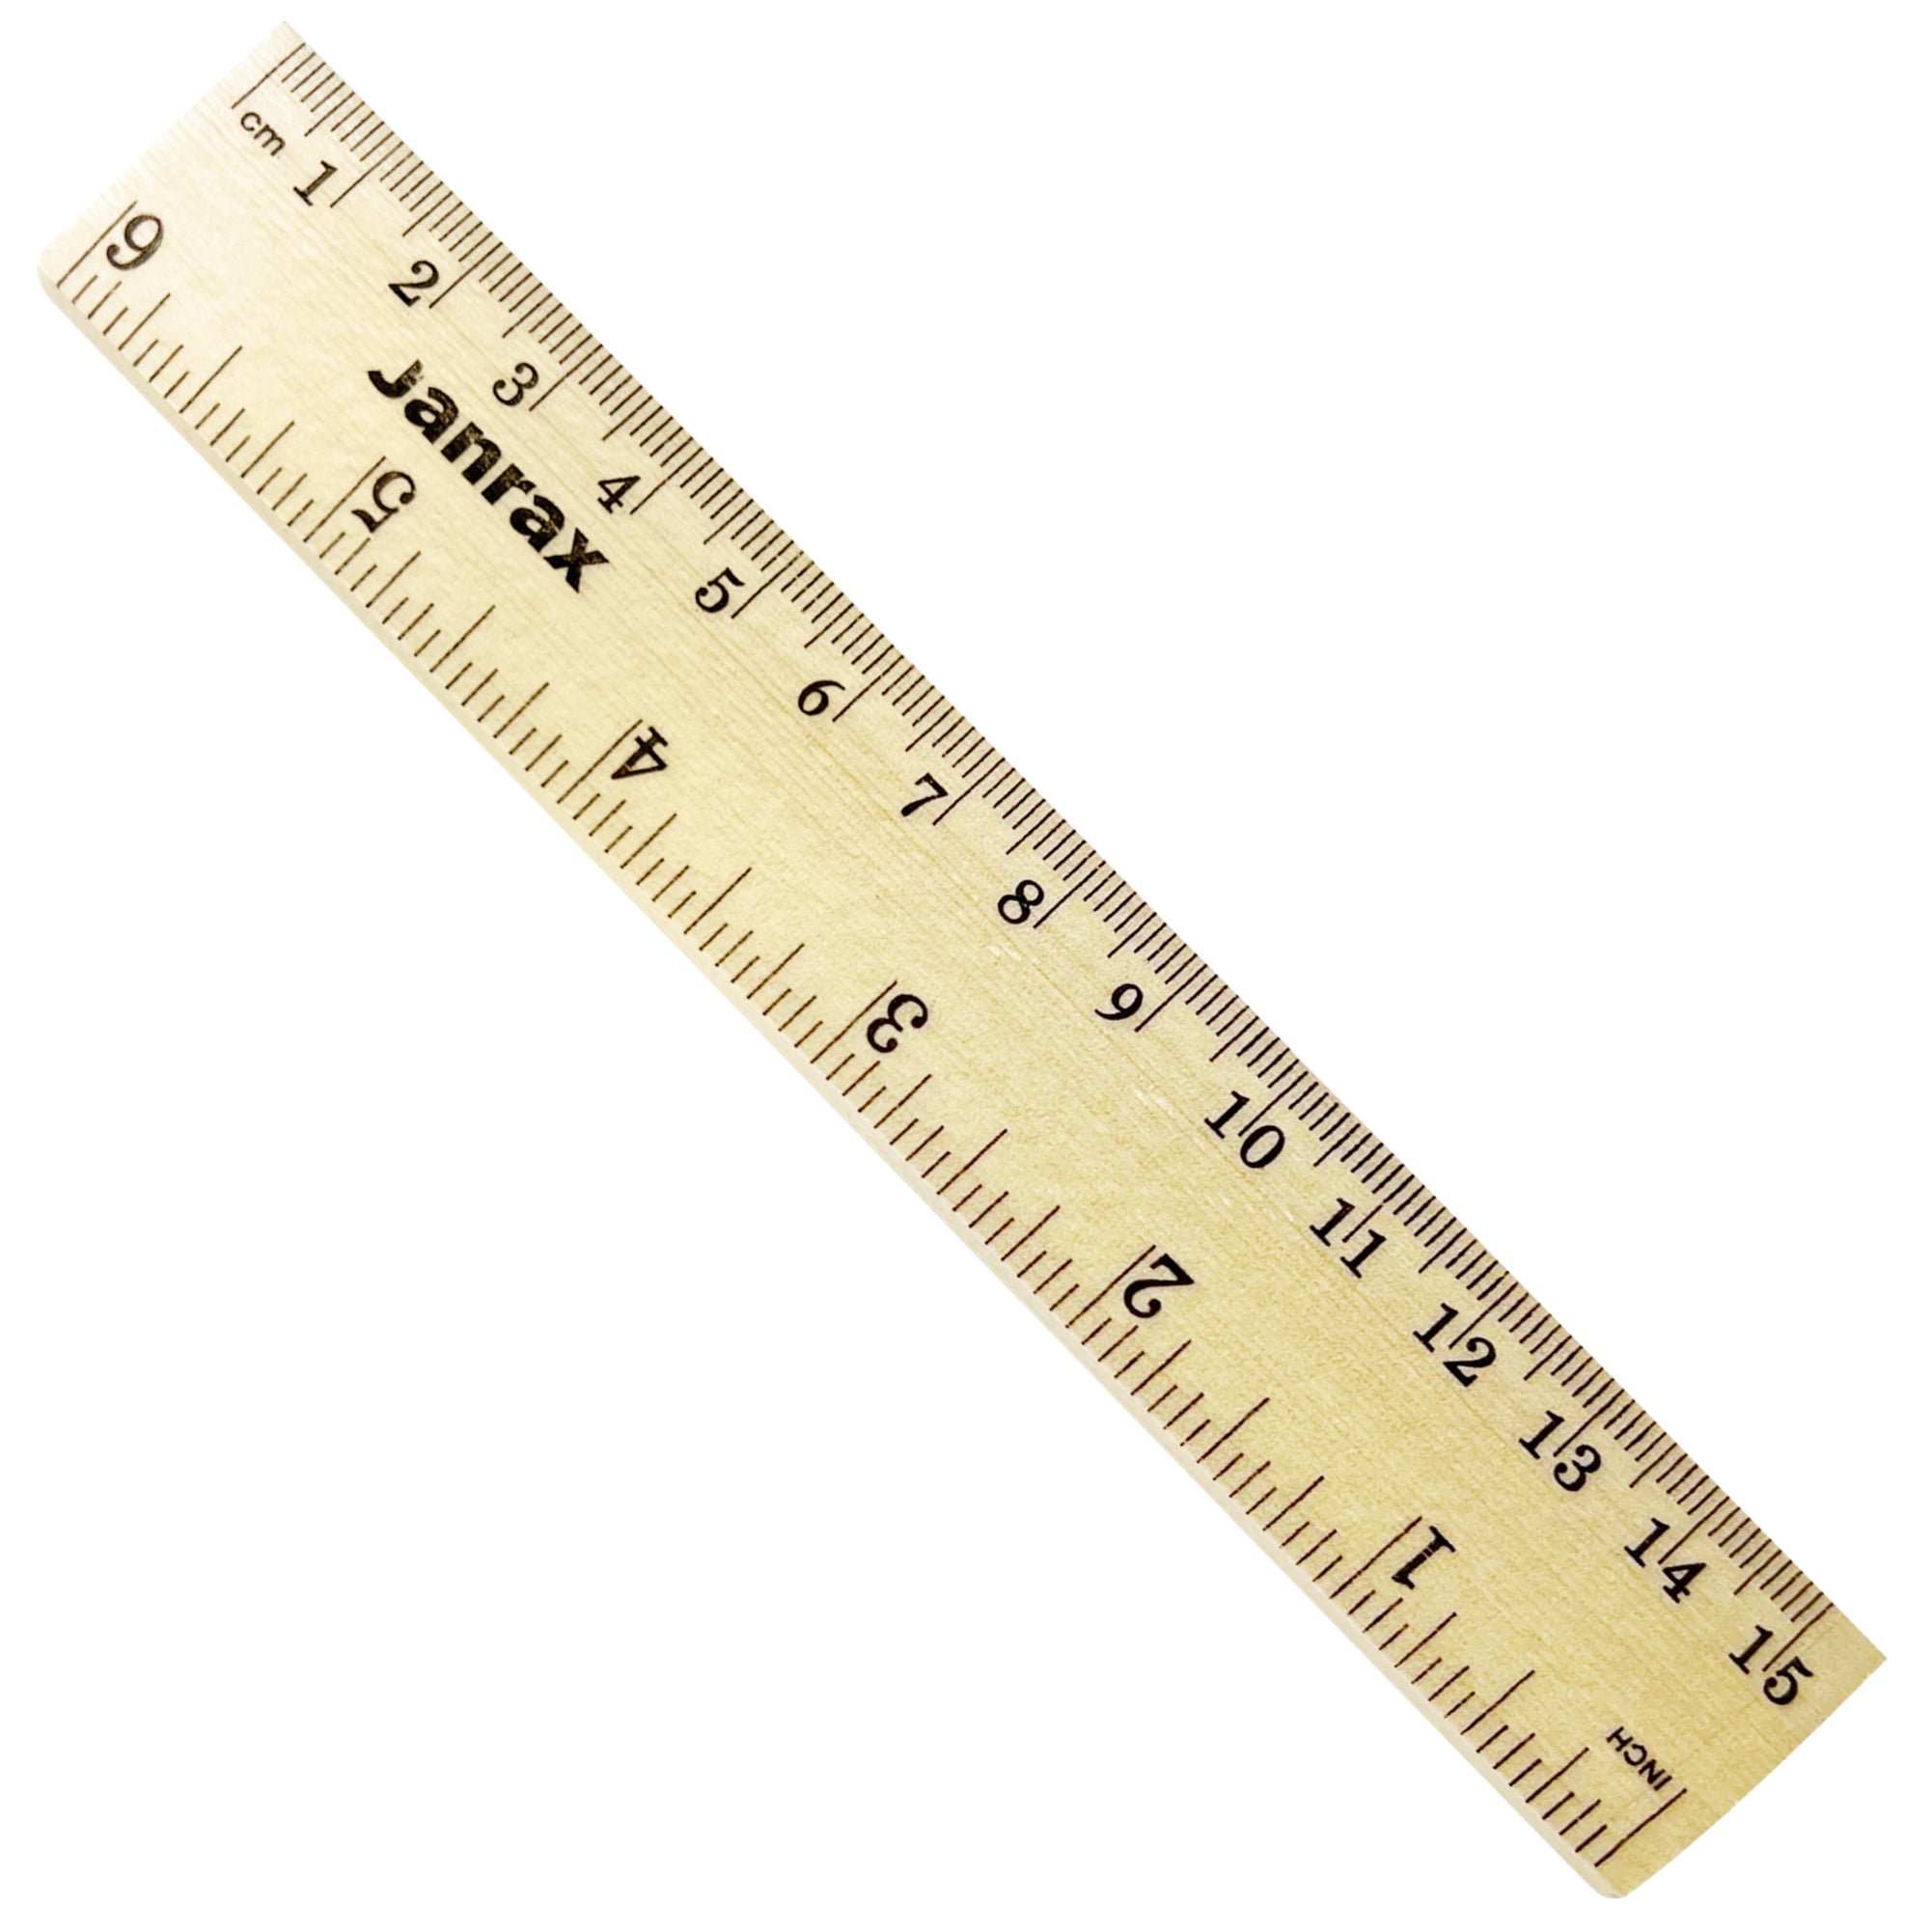 15cm Wooden Ruler by Janrax